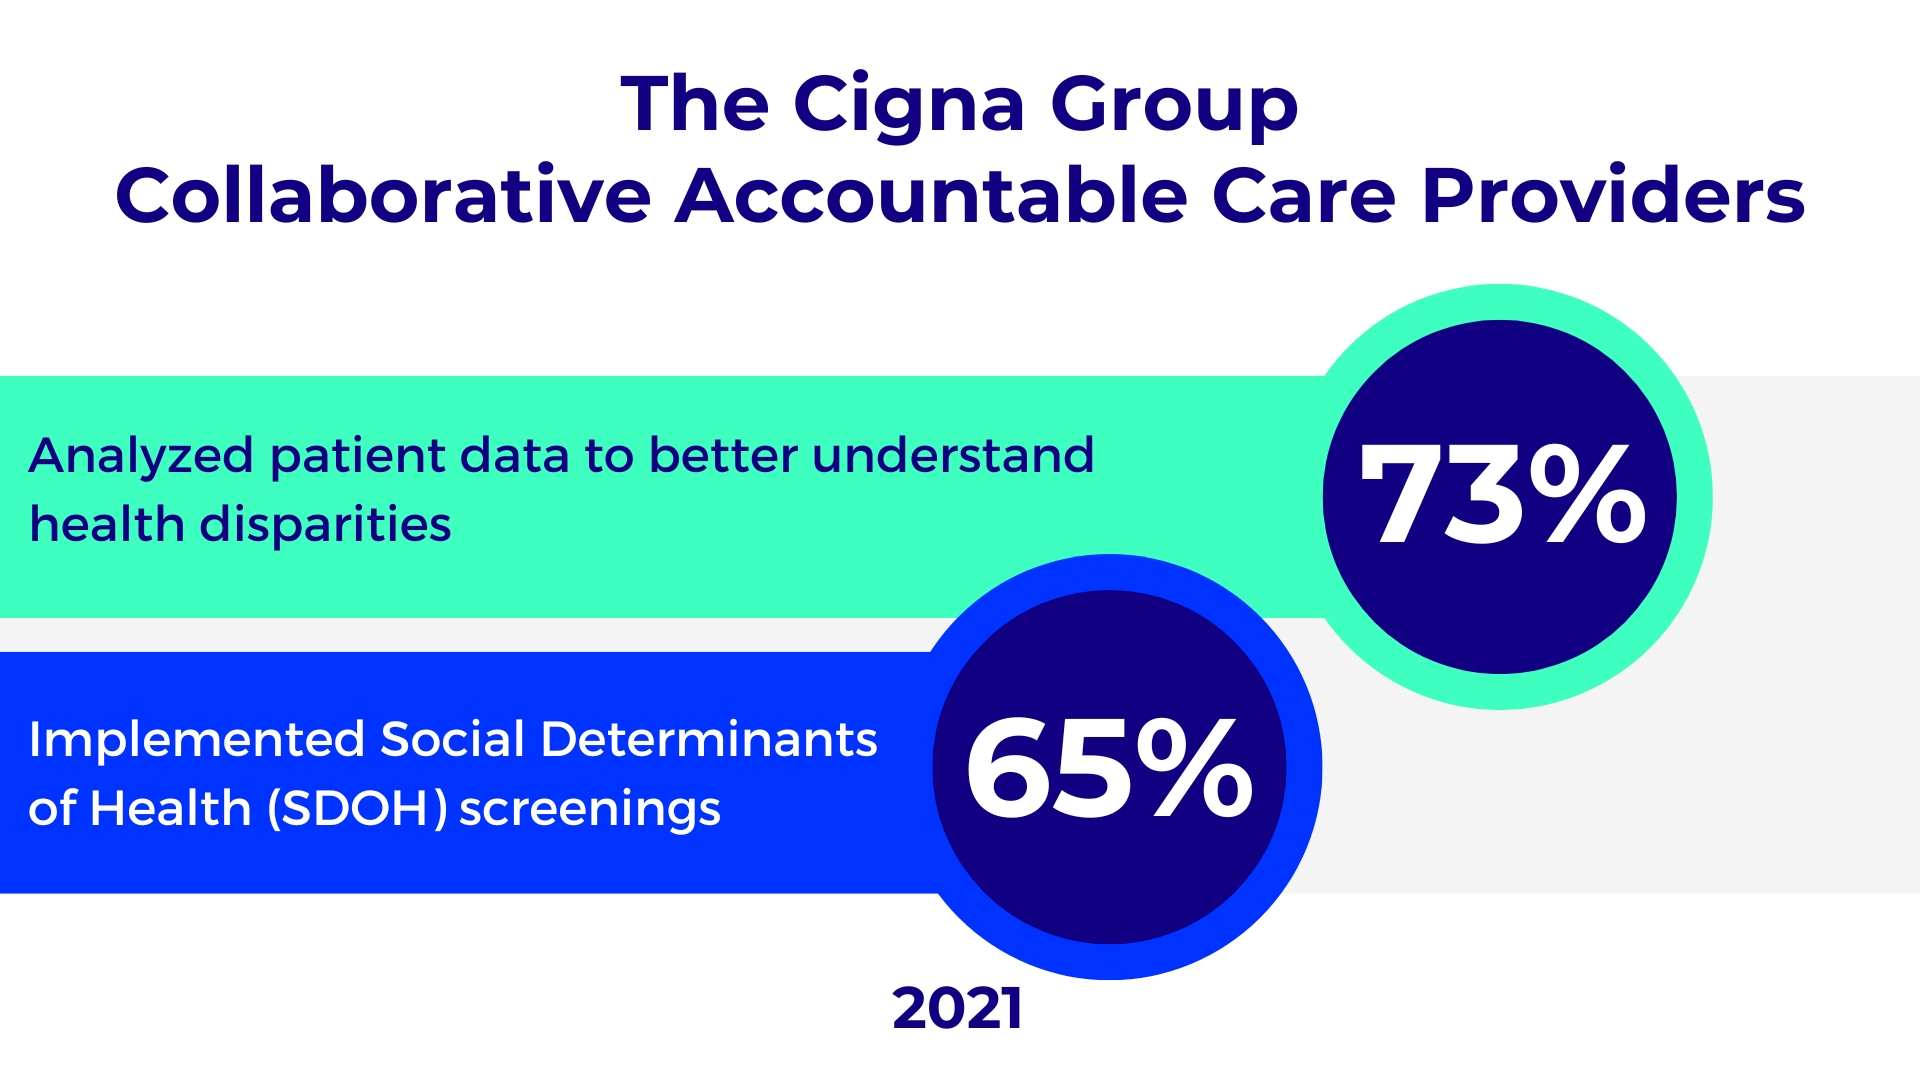 graph showing 73% of the CAC providers analyzed patient data and 65% implemented social determinants of health screenings